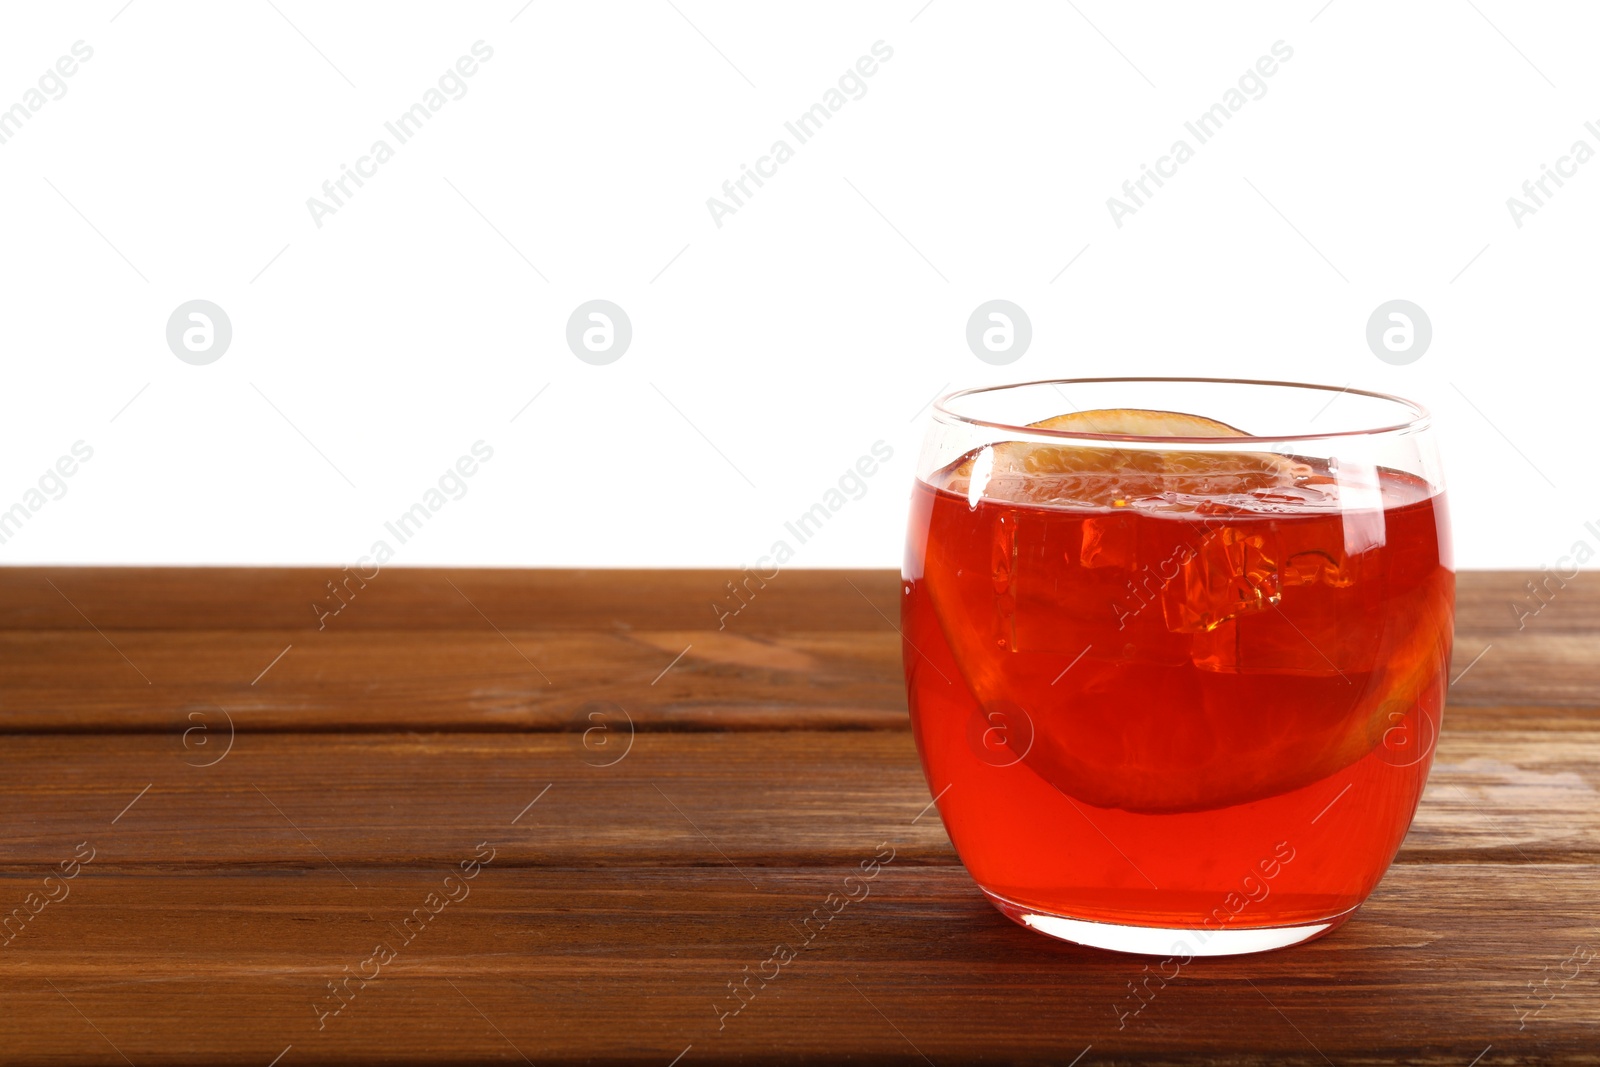 Photo of Aperol spritz cocktail and orange slices in glass on wooden table against white background